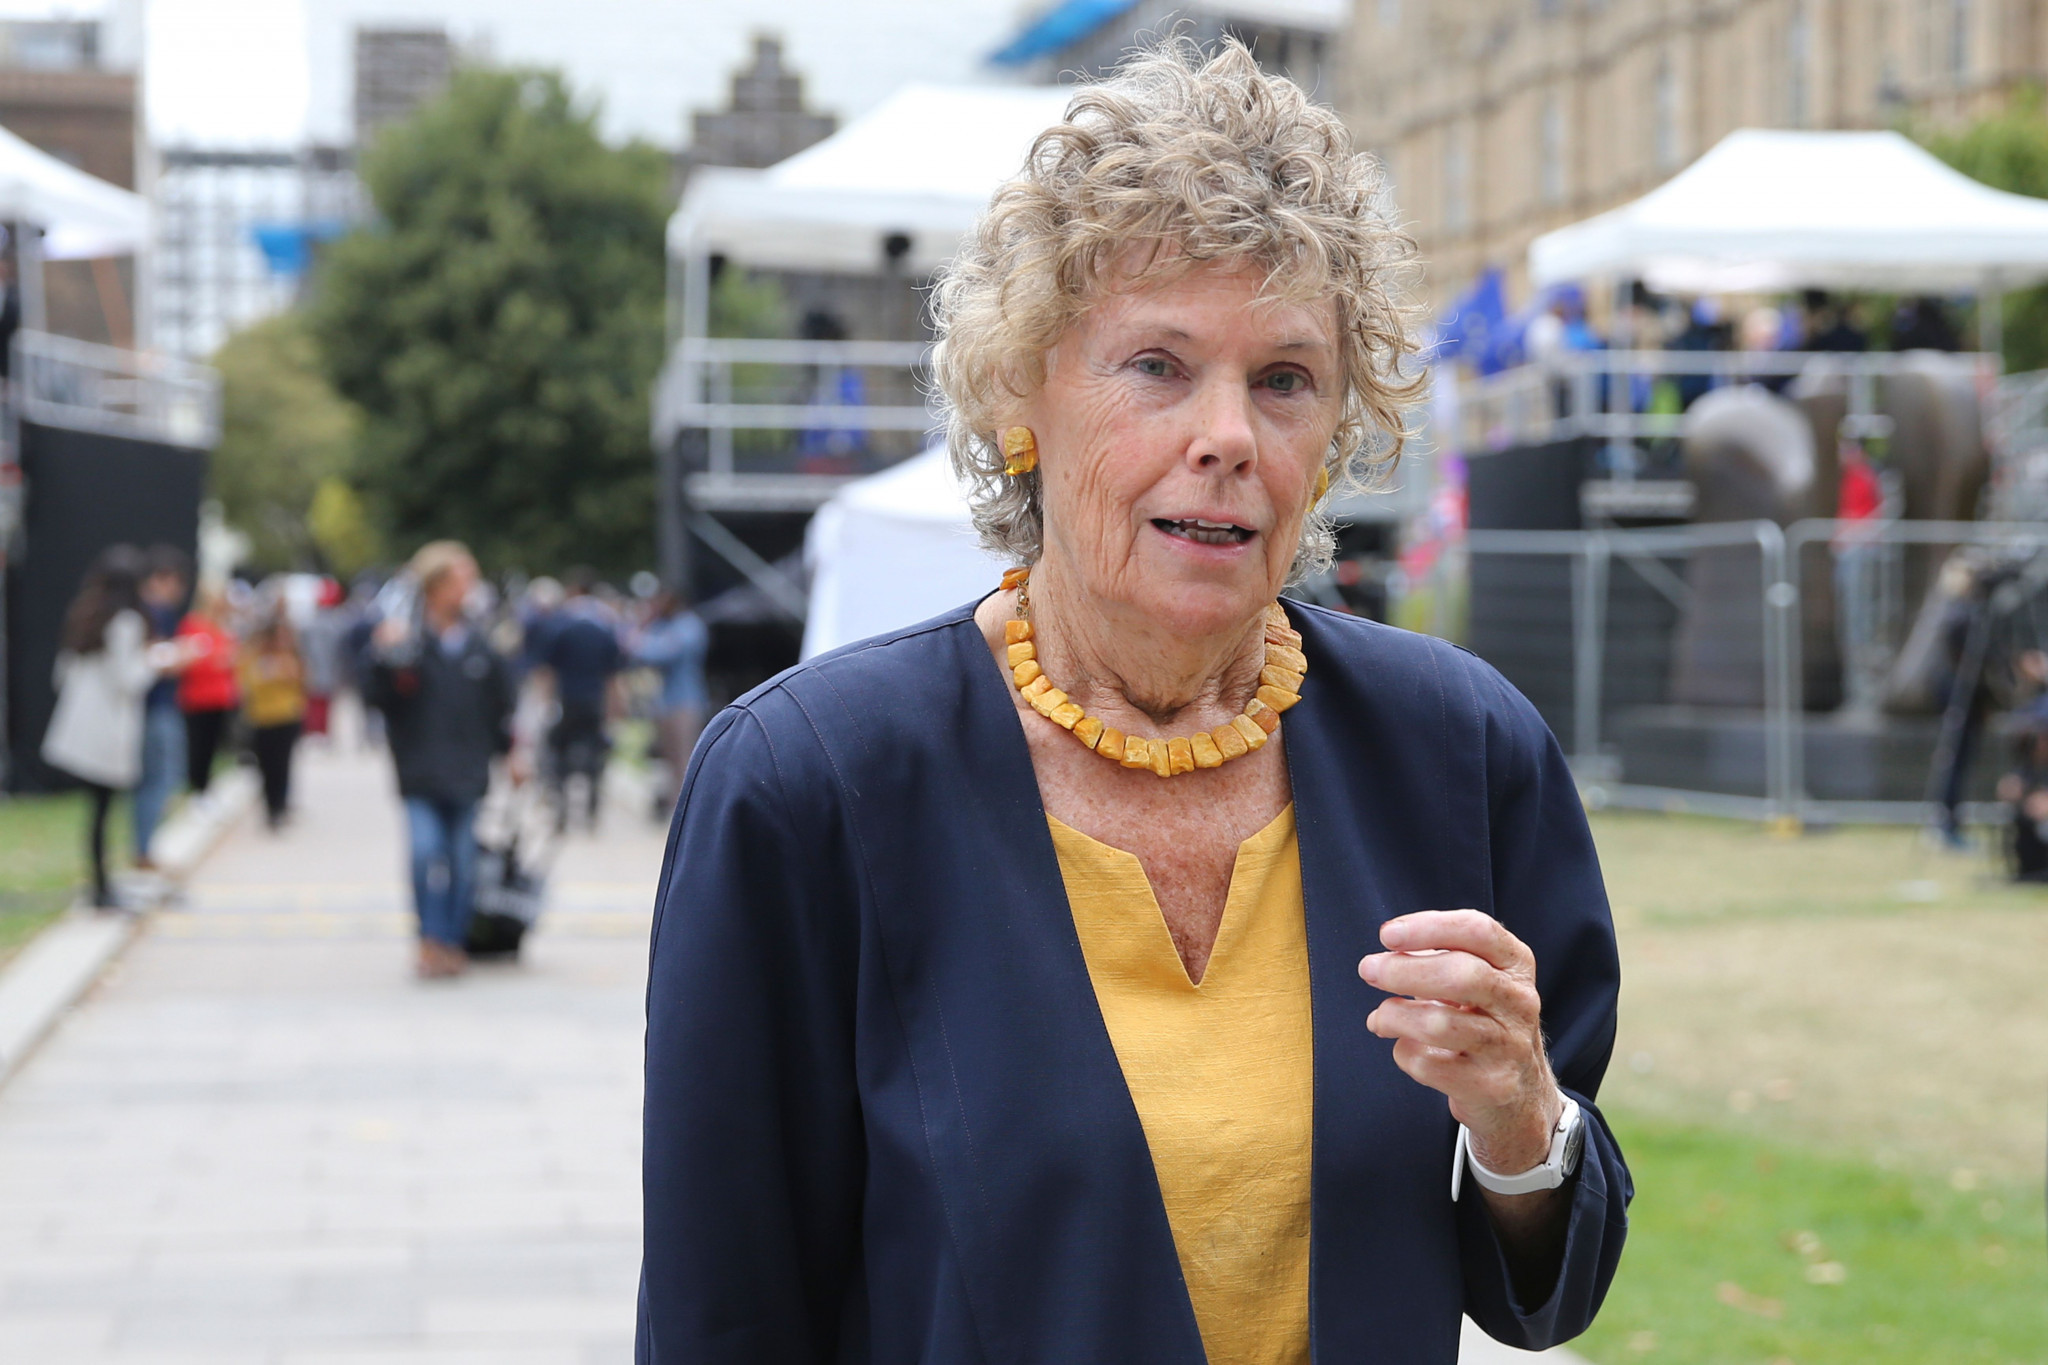 Kate Hoey performed ouststandingly as the first female sports minister ©Getty Images